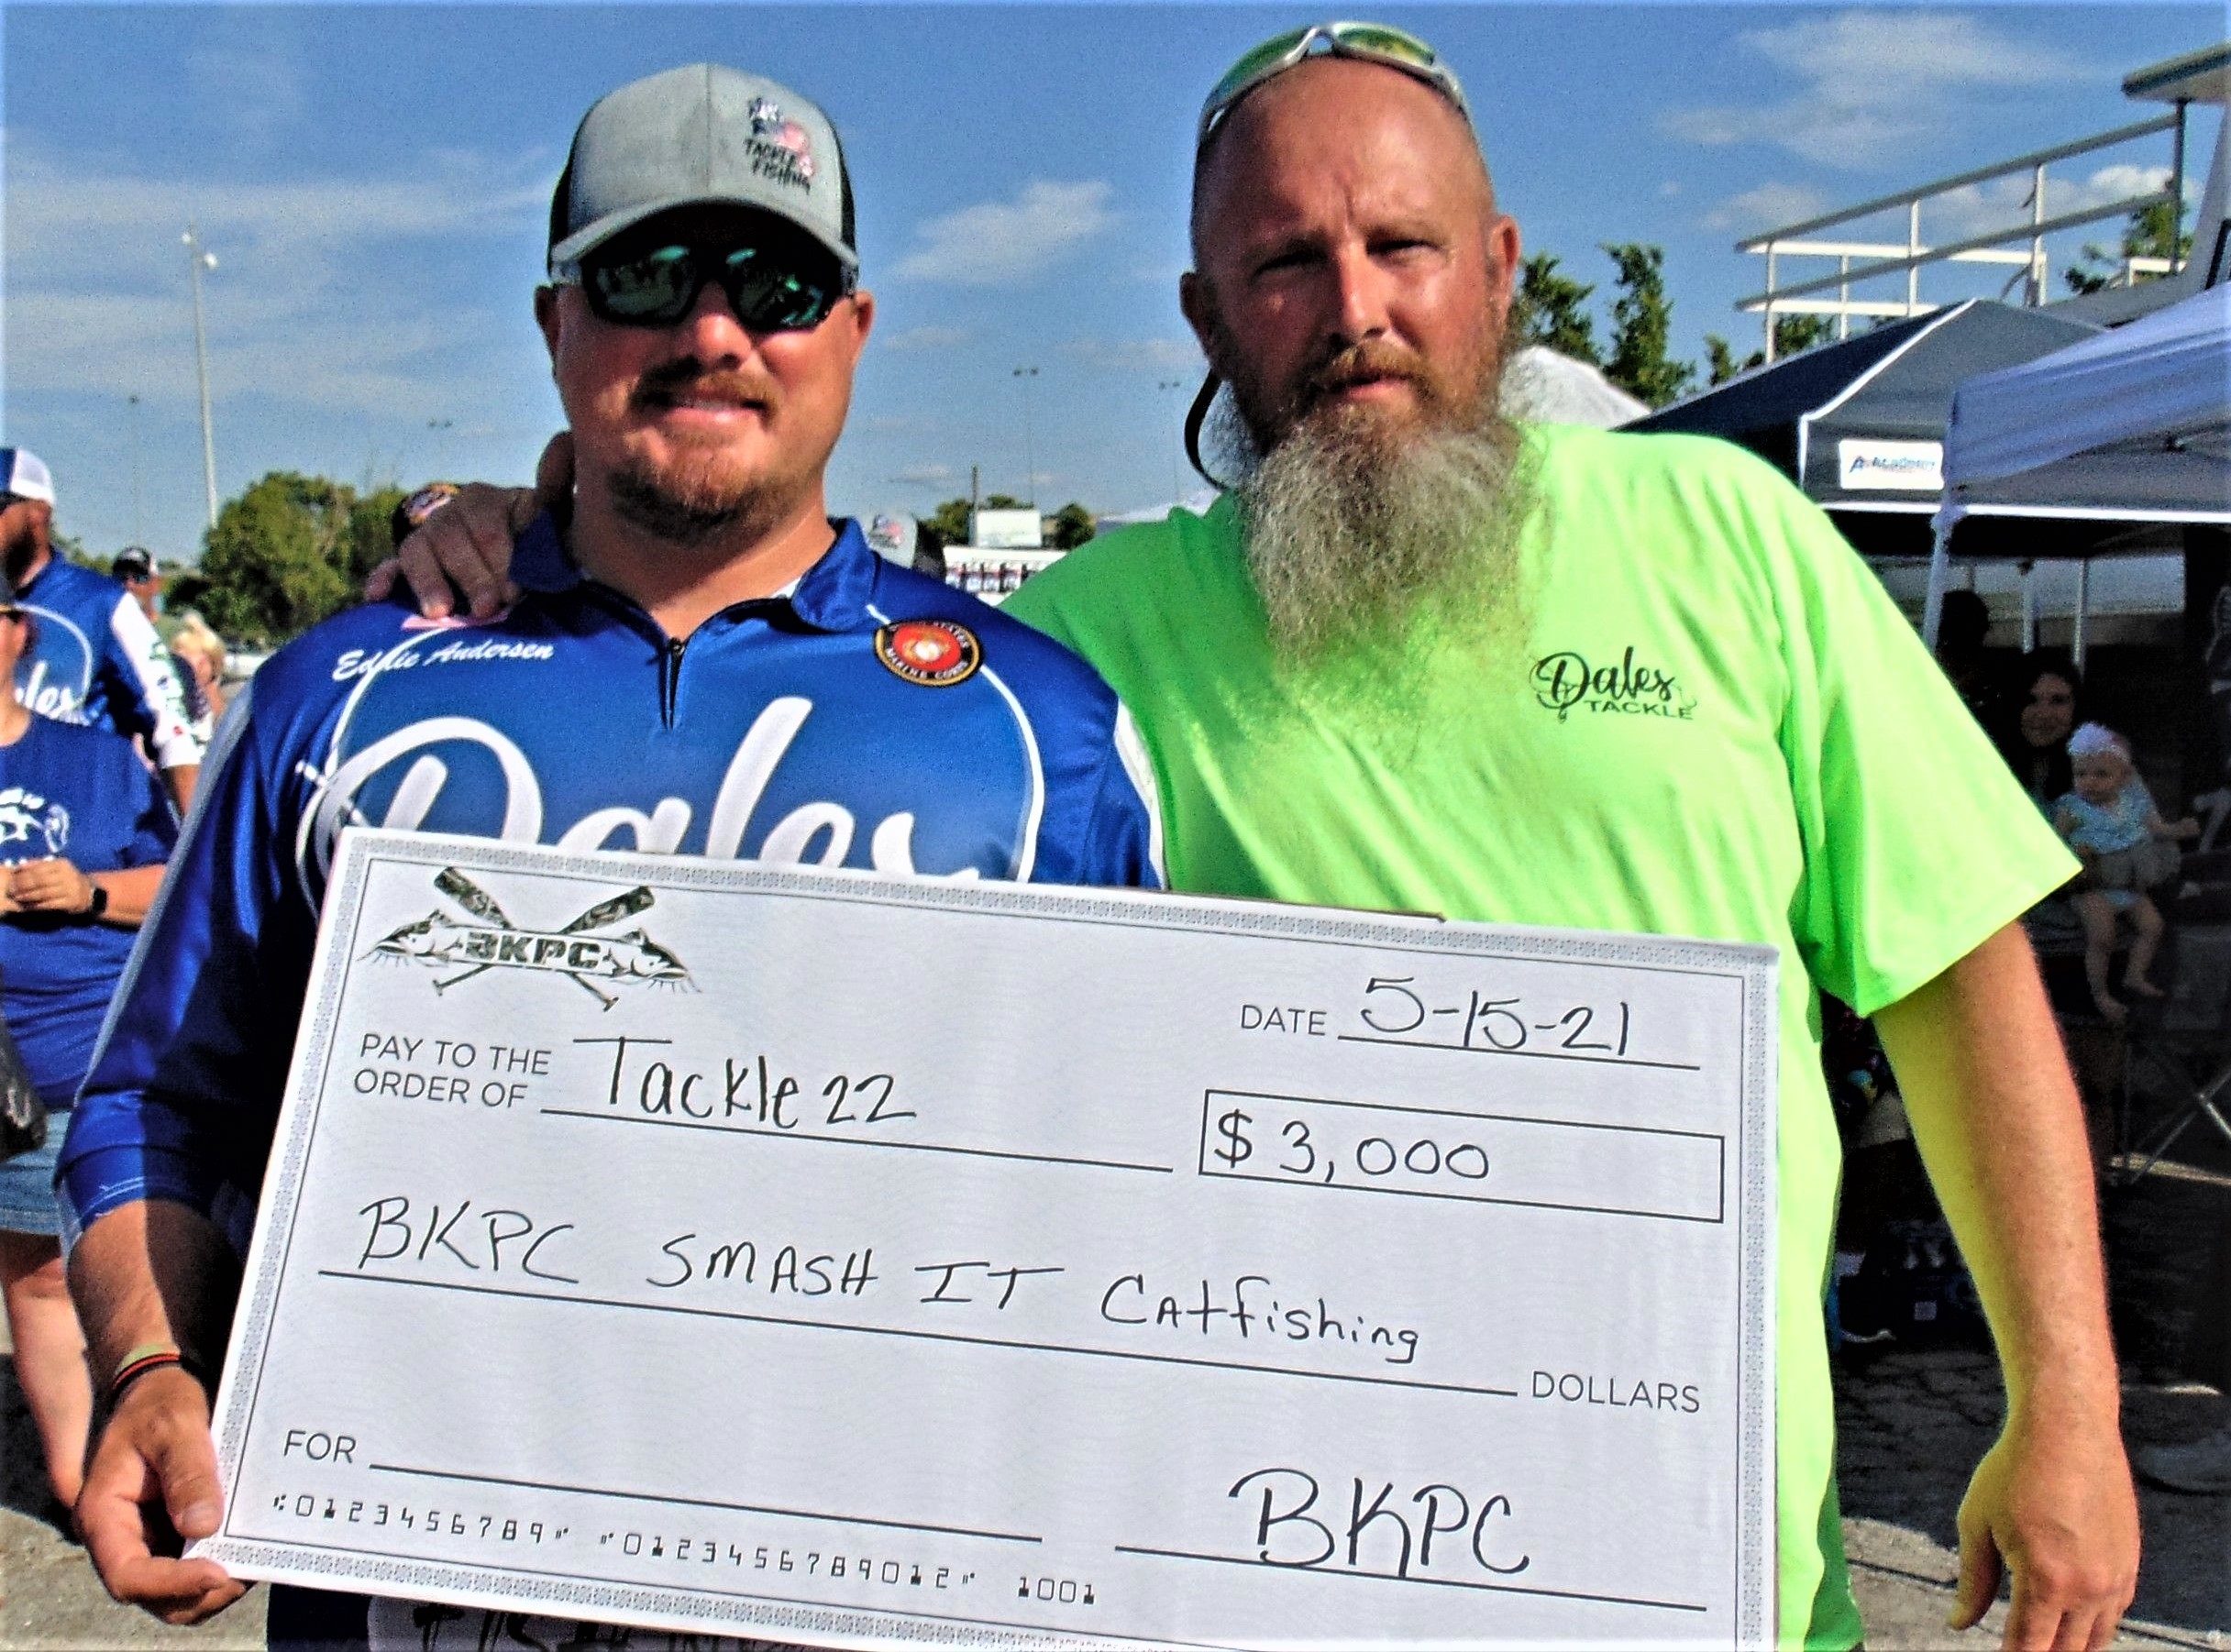 catfish, charity, tournament, Tackle22 Fishing, BKPC, Tennessee River, Edward Andersen, Joey Middleton, Steve Henderson